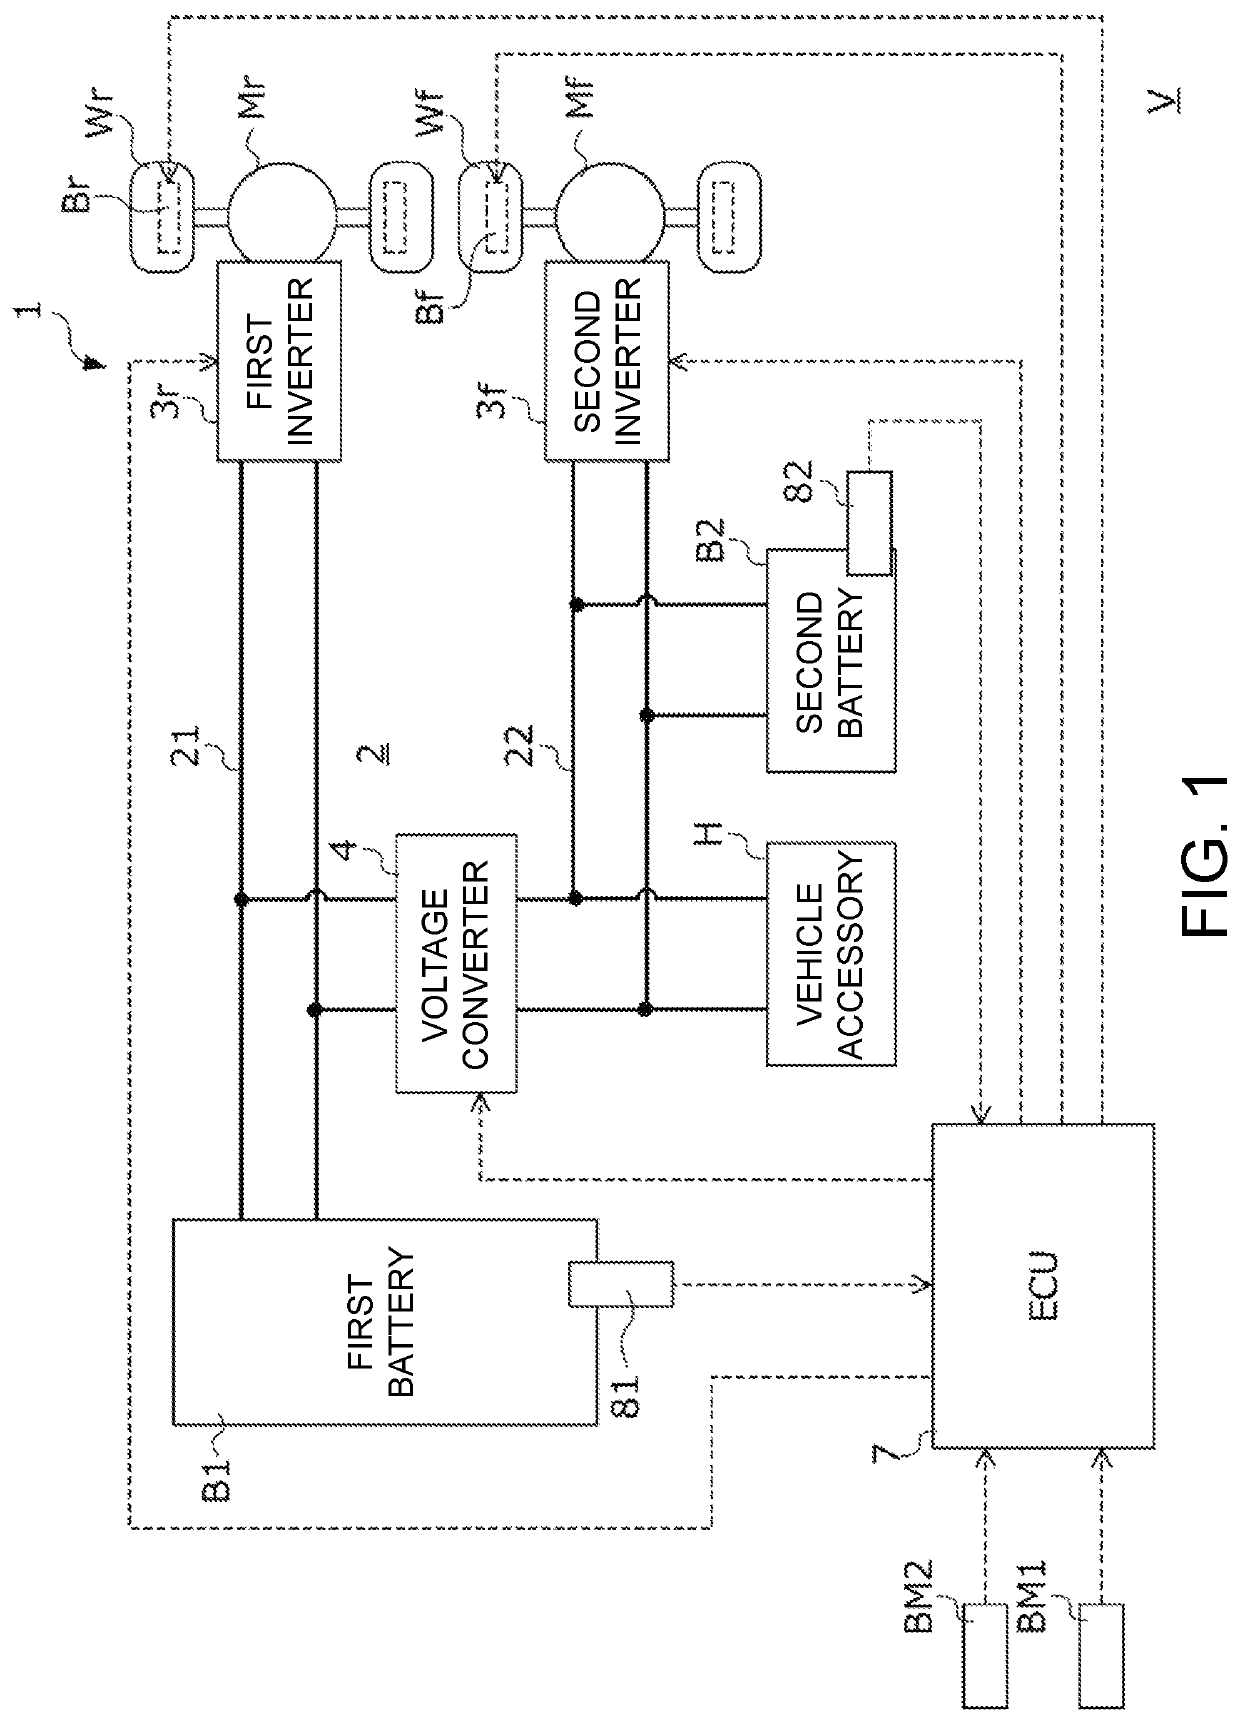 Vehicle power supply system